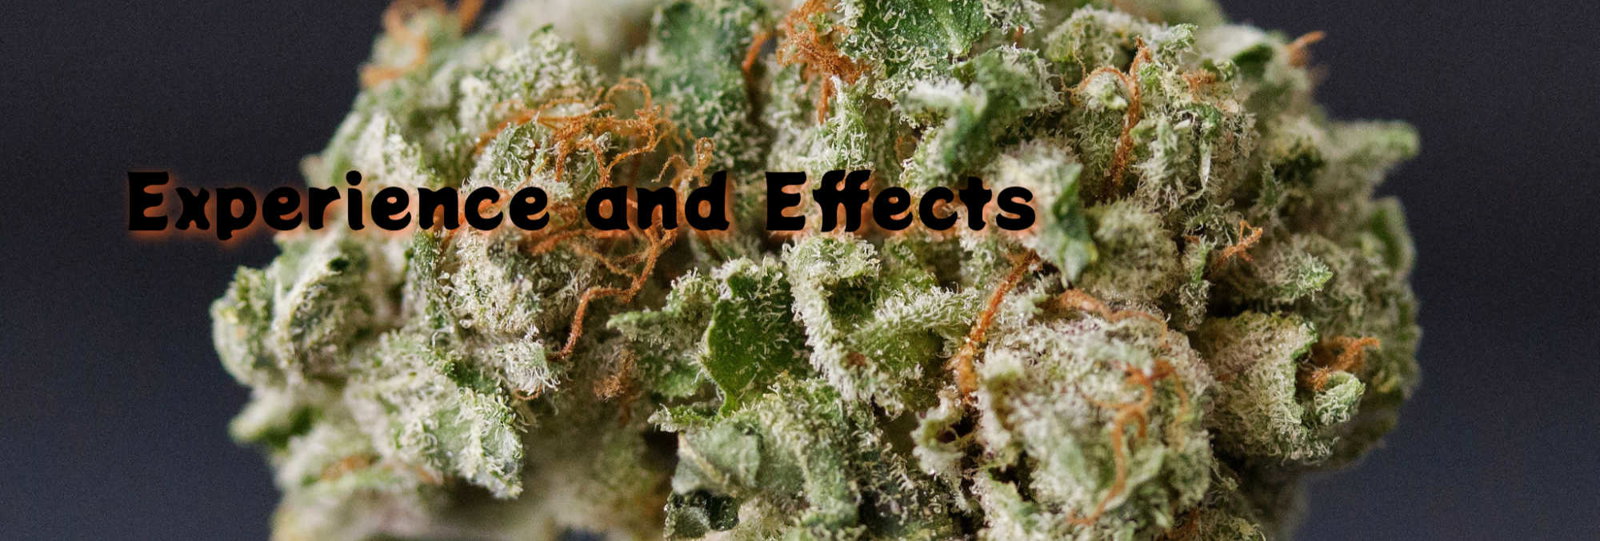 image of black mamba strain experience and effects